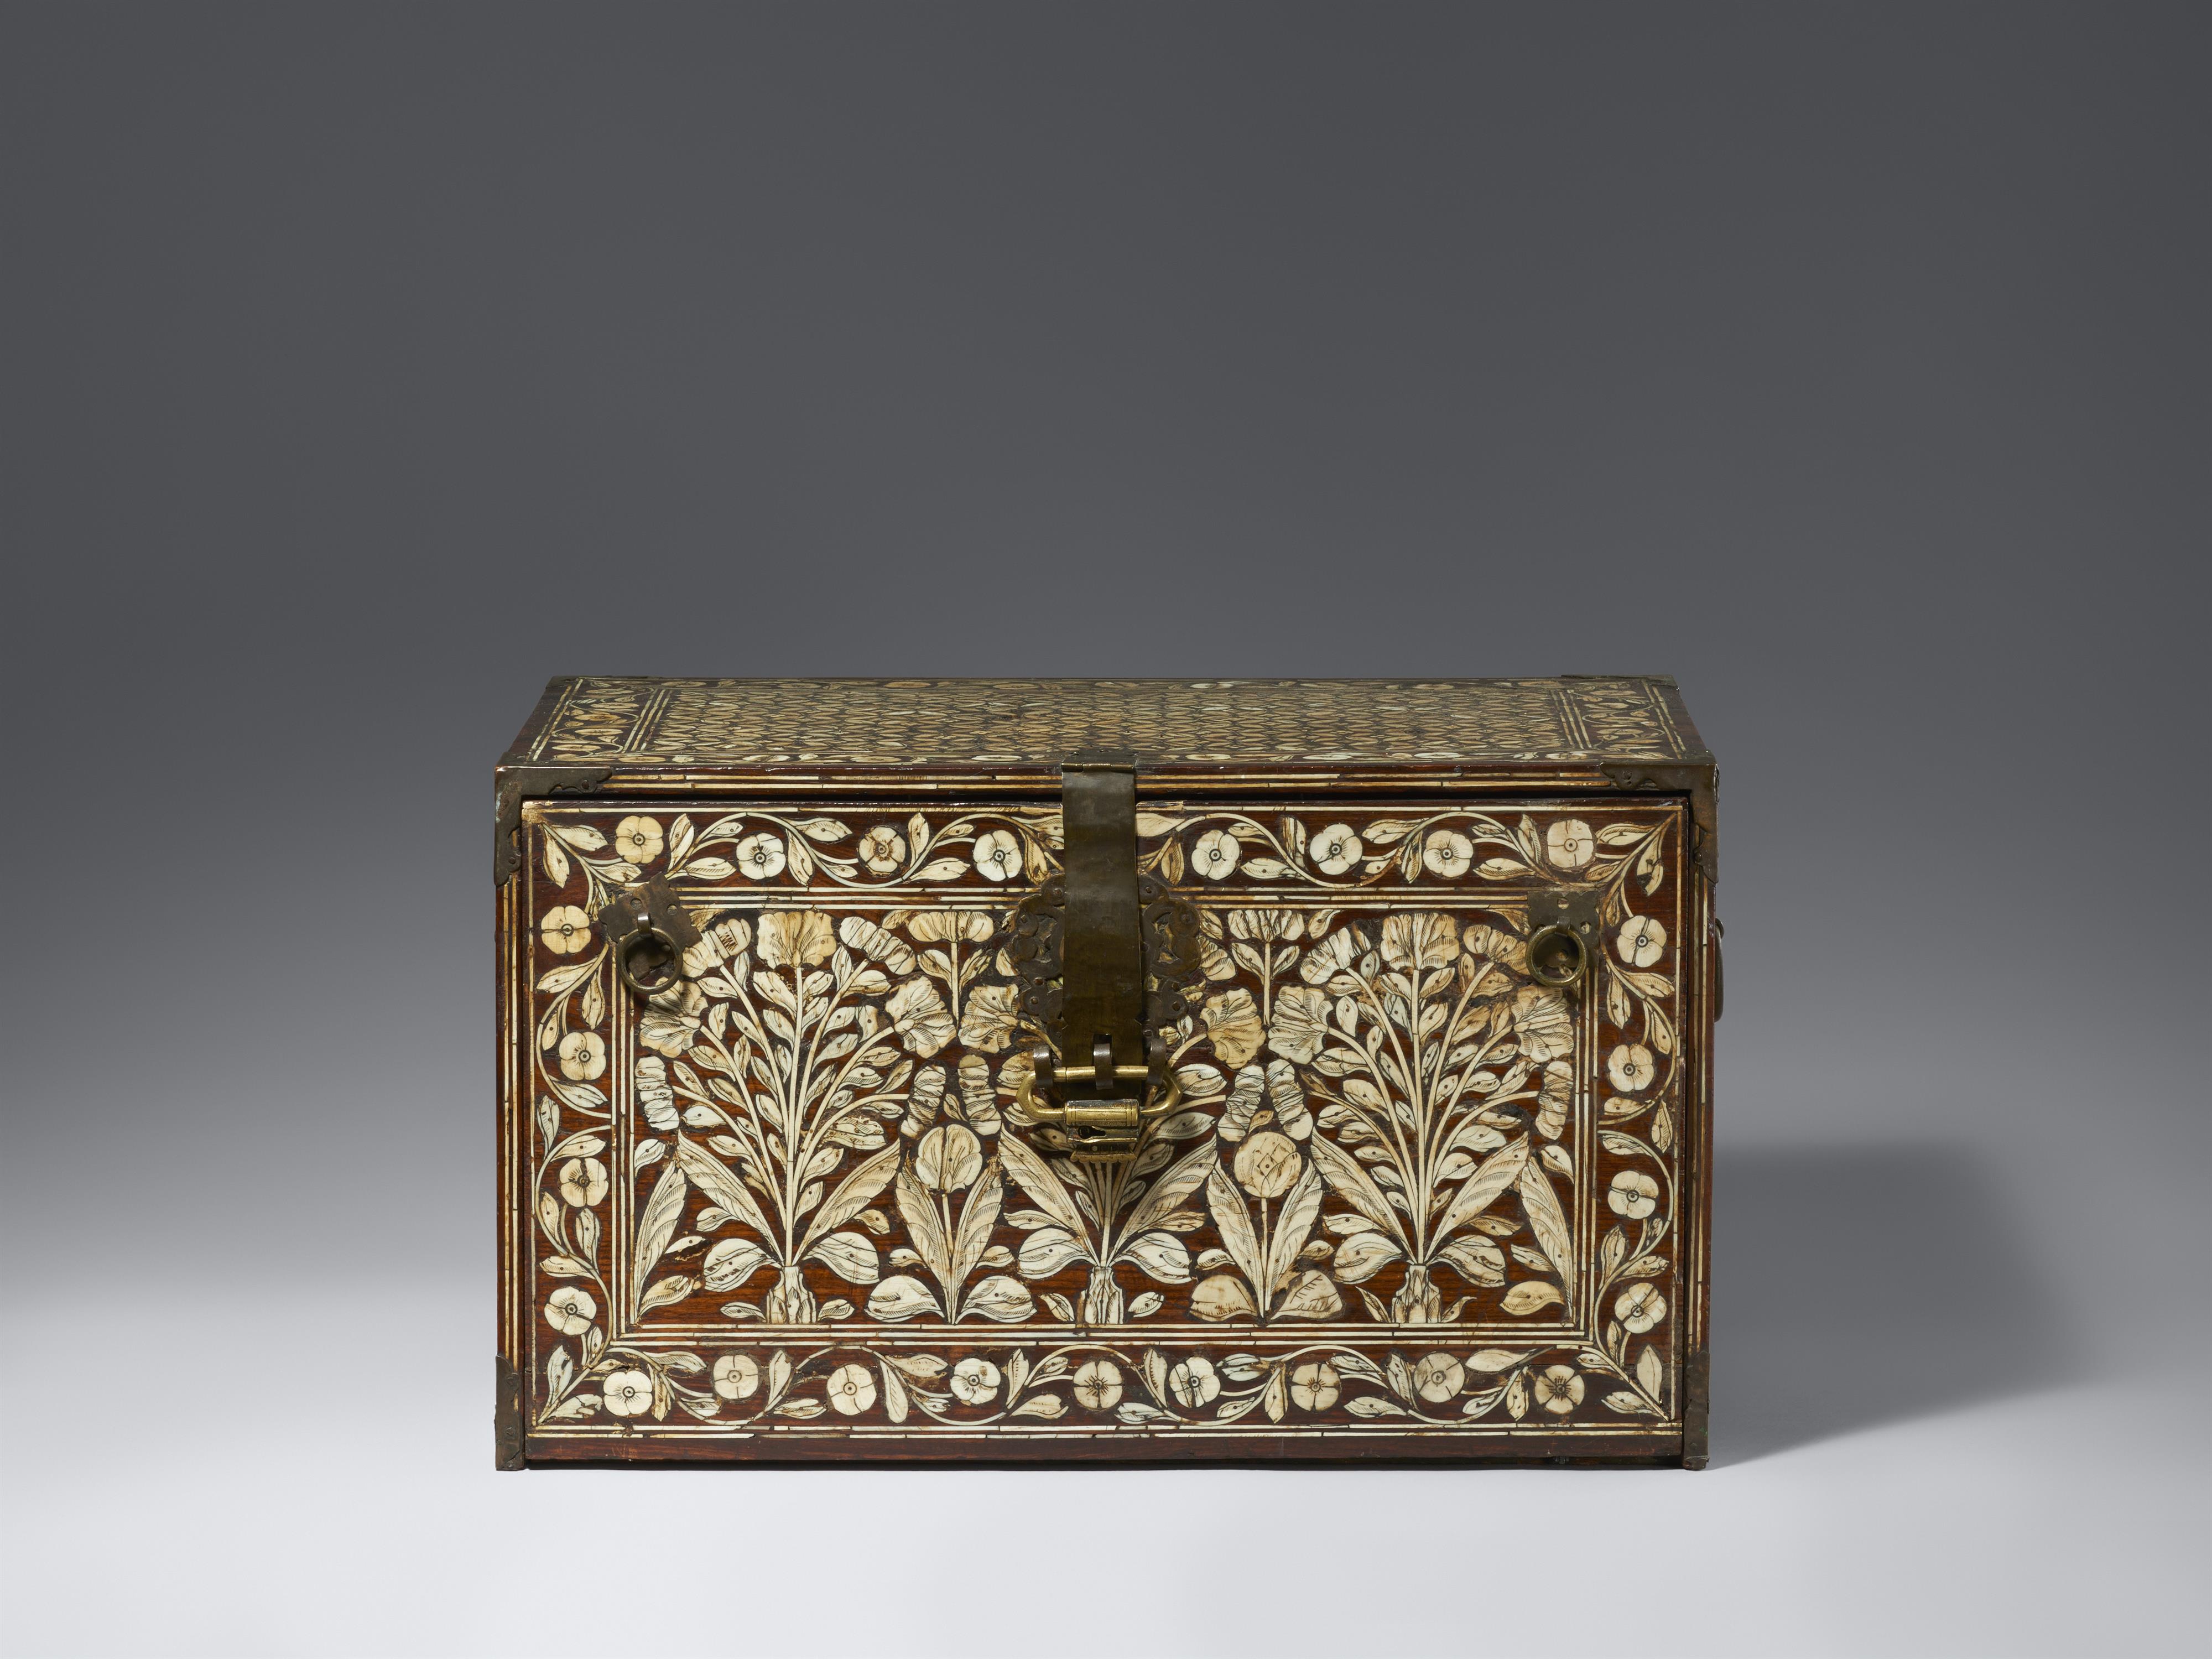 A Mughal ivory-inlaid wooden chest. Northwest-India/Pakistan, Gujarat or Sindh. 17th century - image-2